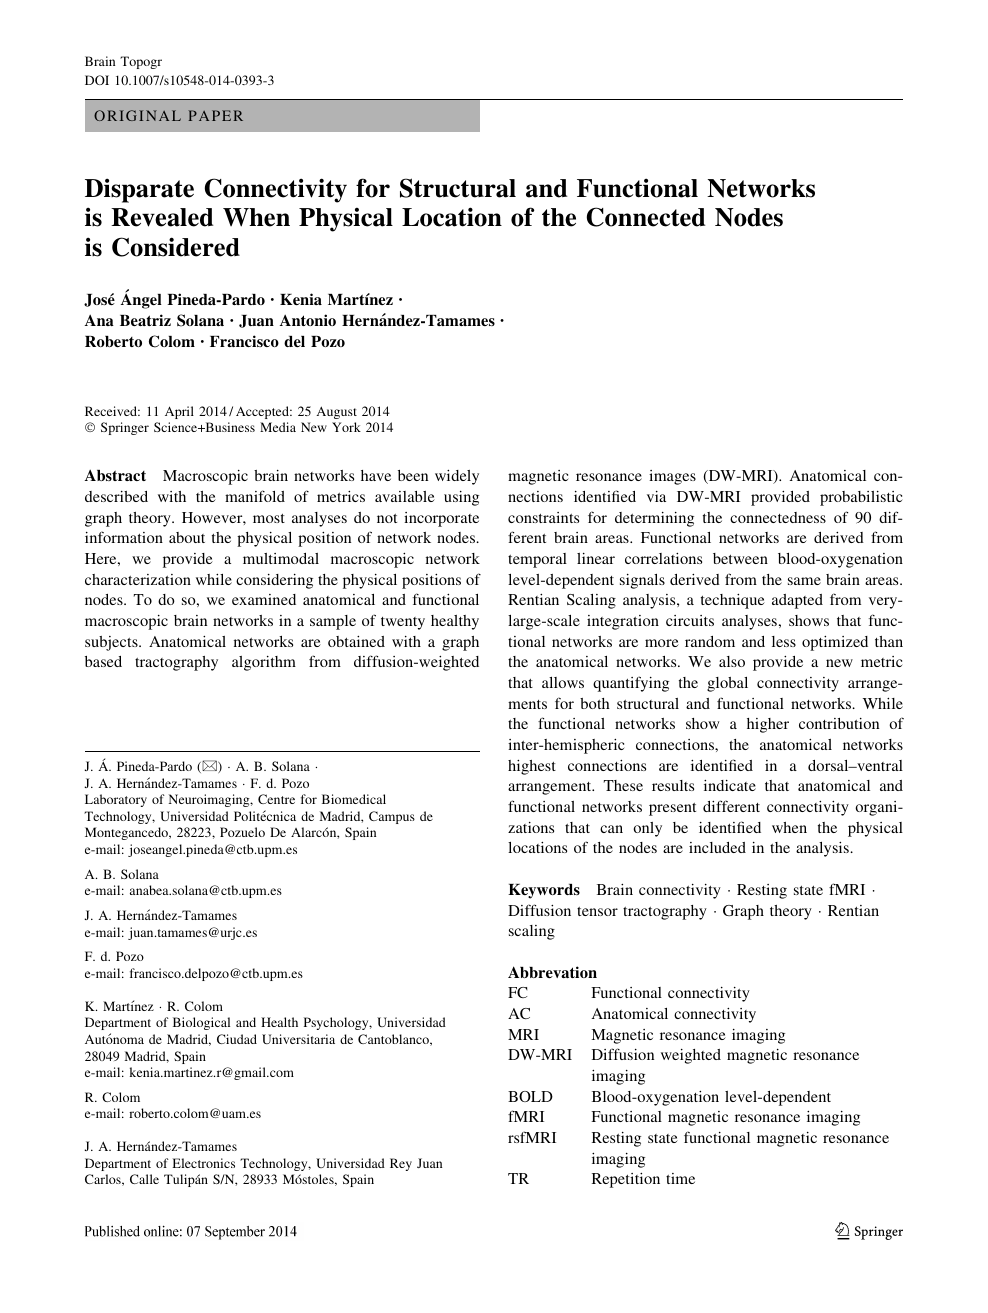 Disparate Connectivity For Structural And Functional Networks Is Revealed When Physical Location Of The Connected Nodes Is Considered Topic Of Research Paper In Clinical Medicine Download Scholarly Article Pdf And Read